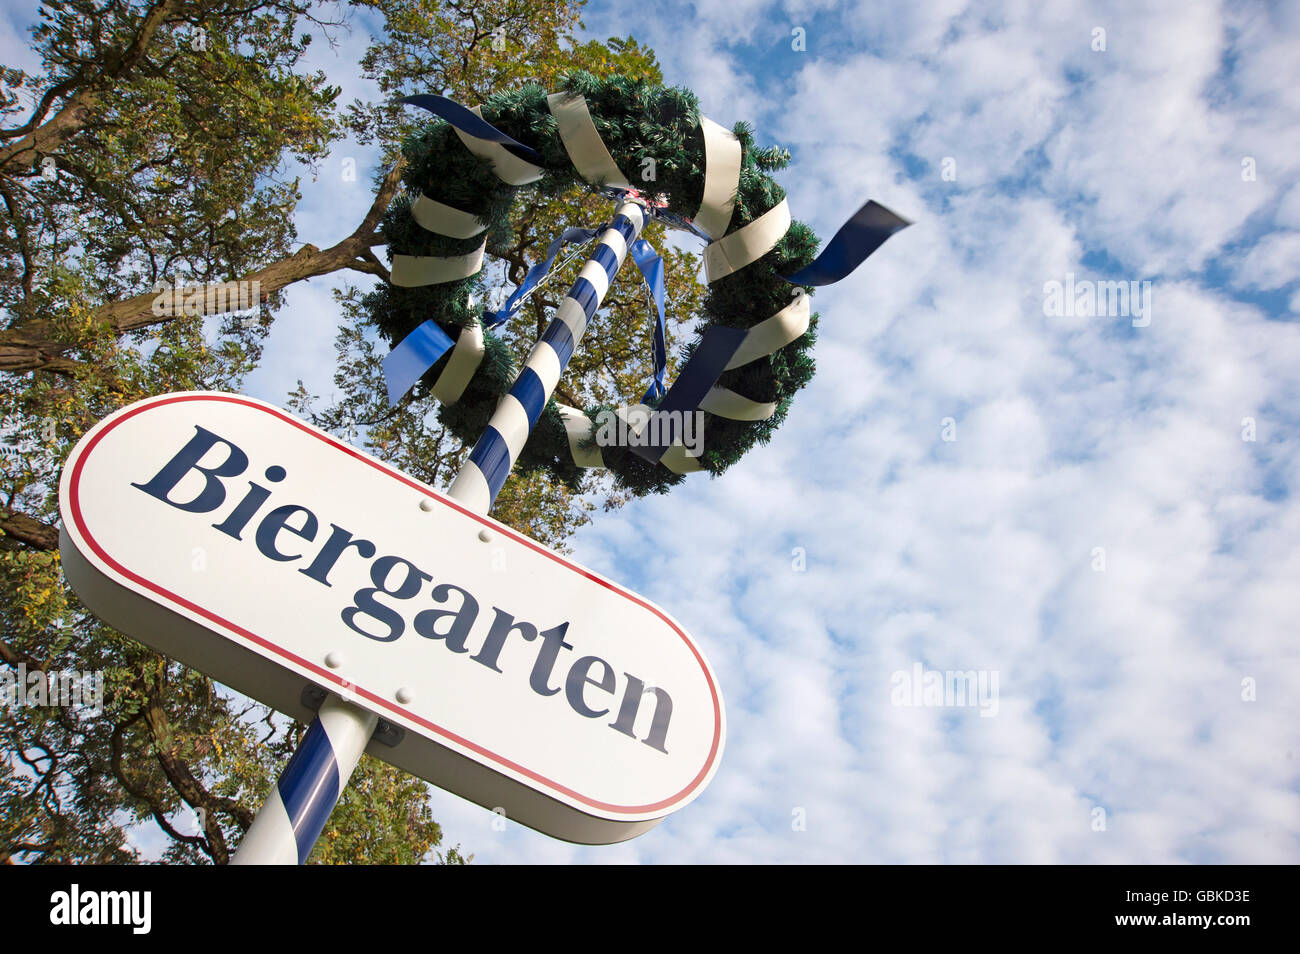 Beer garden sign on a maypole on the grounds of the former Tempelhof Airport, Berlin Stock Photo